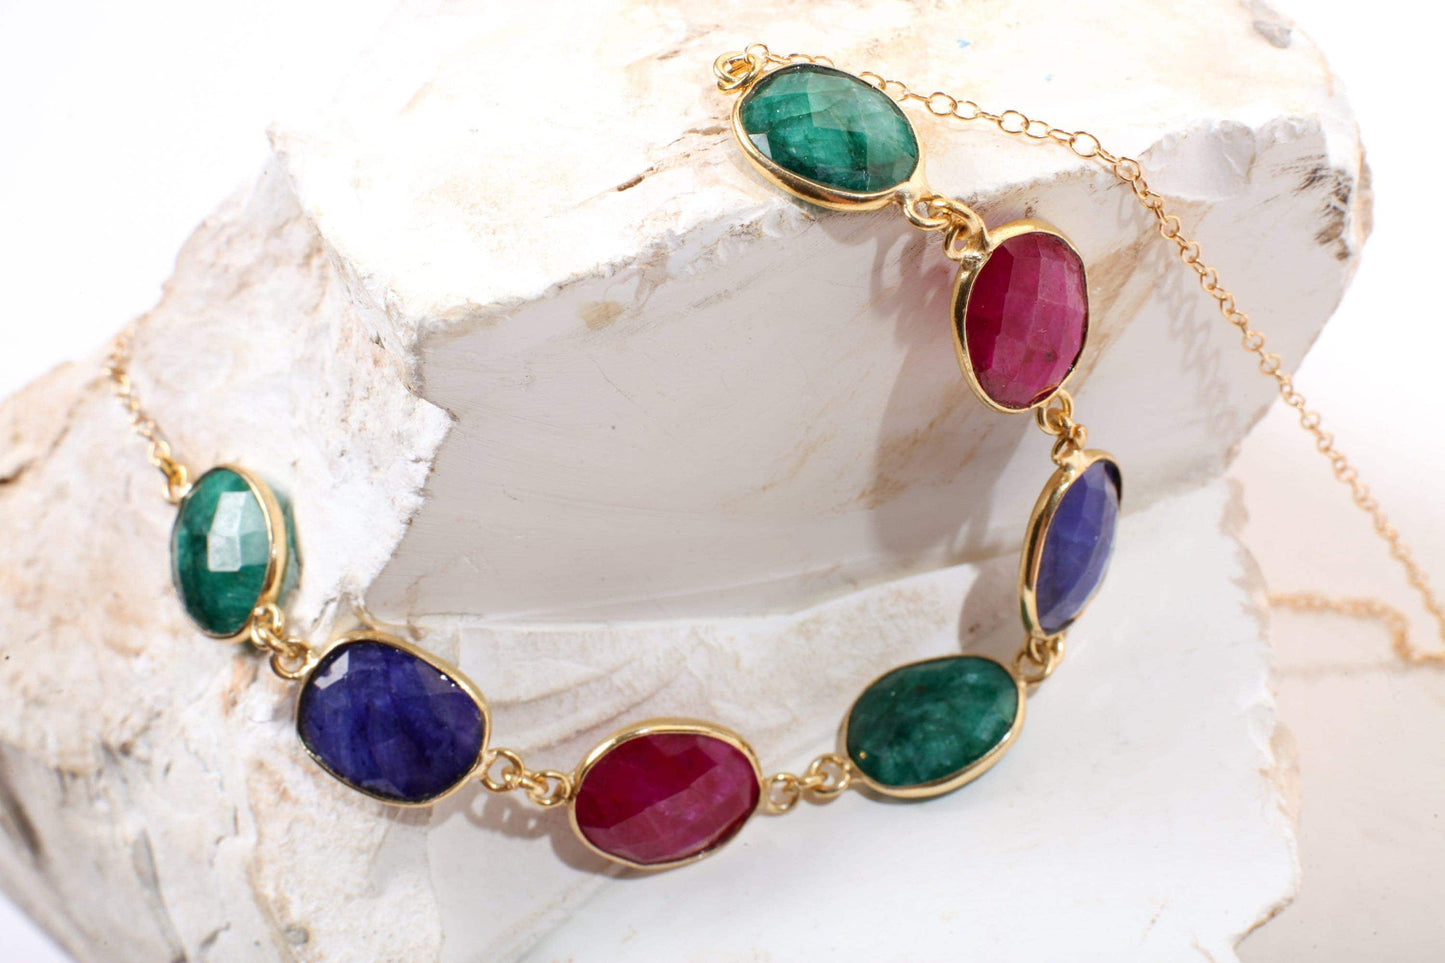 Ruby Sapphire Emerald Gold Bezel Faceted 12x14mm Oval Gemstone in 14K Gold Filled Chain, Elegant Gift for her